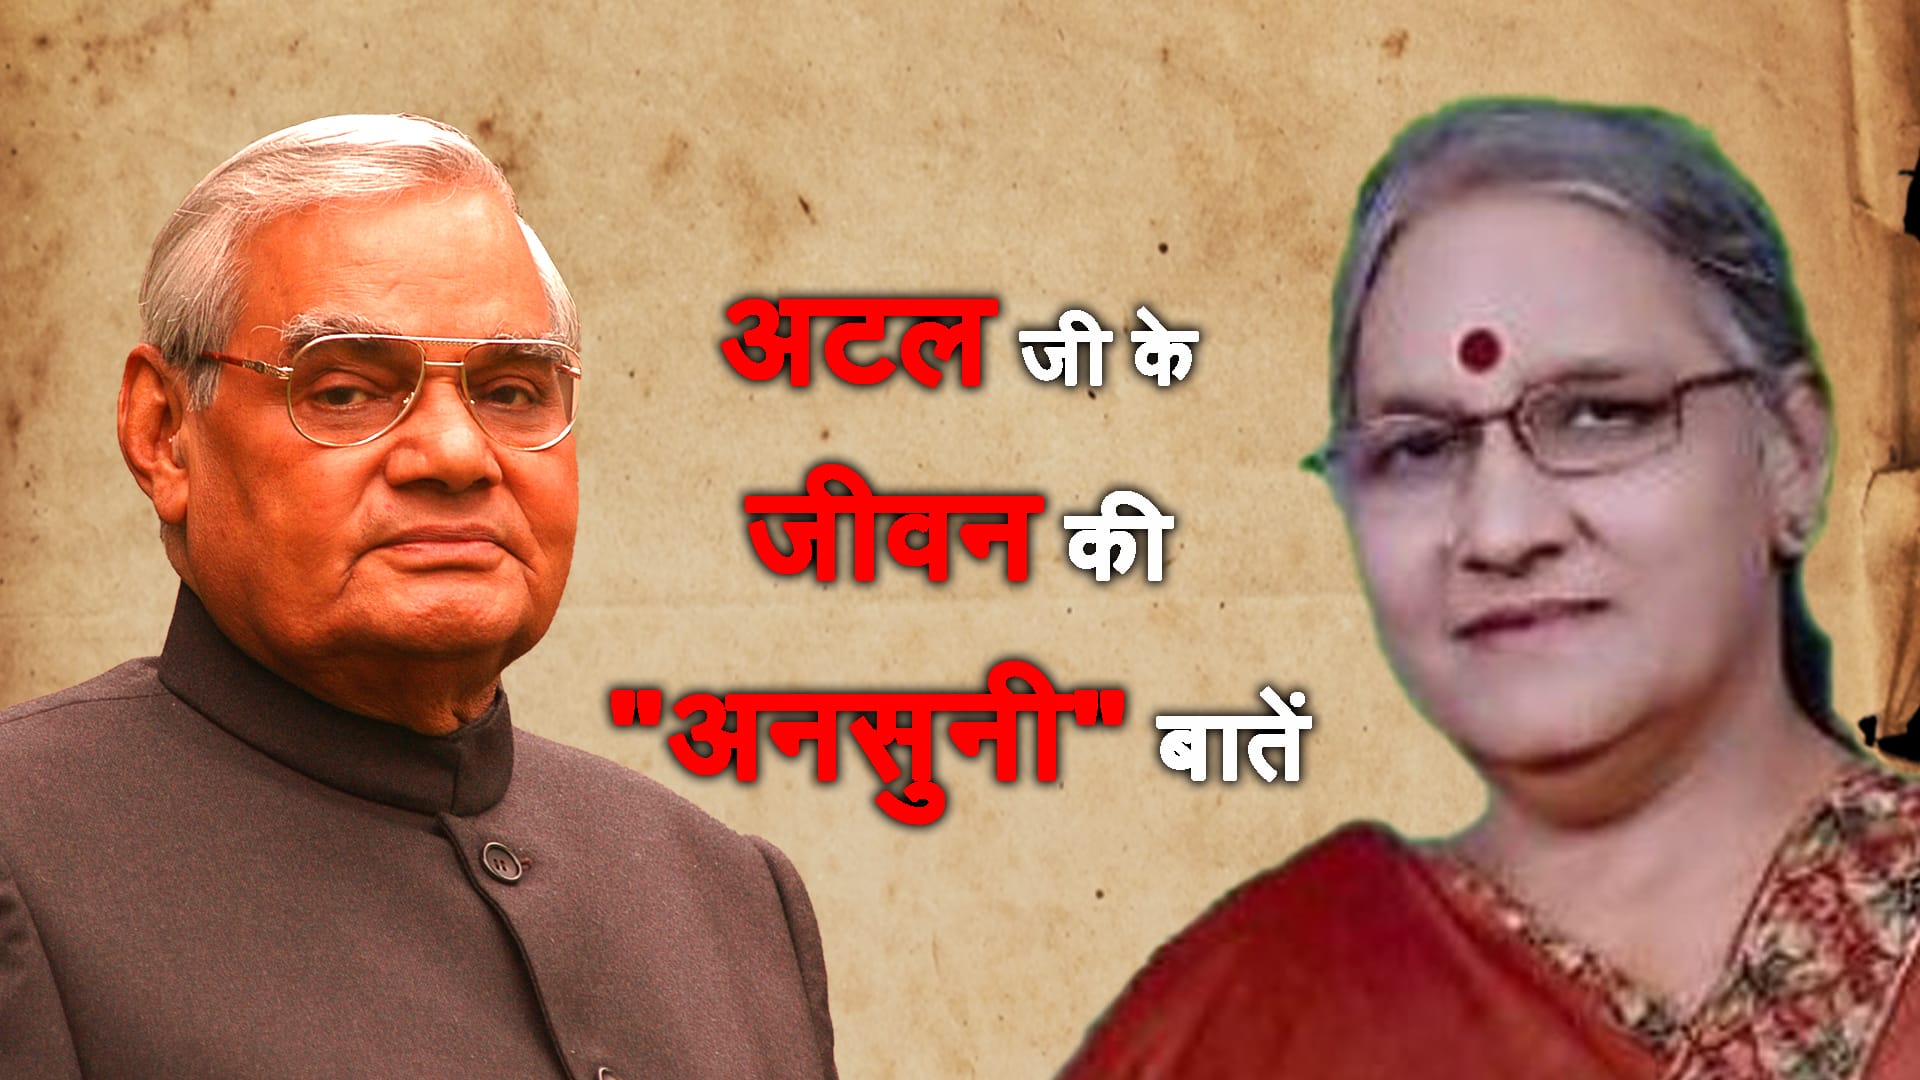 ATAL BIHARI'S NIECE TELL SOME SECRETS ABOUT HIS LIFE